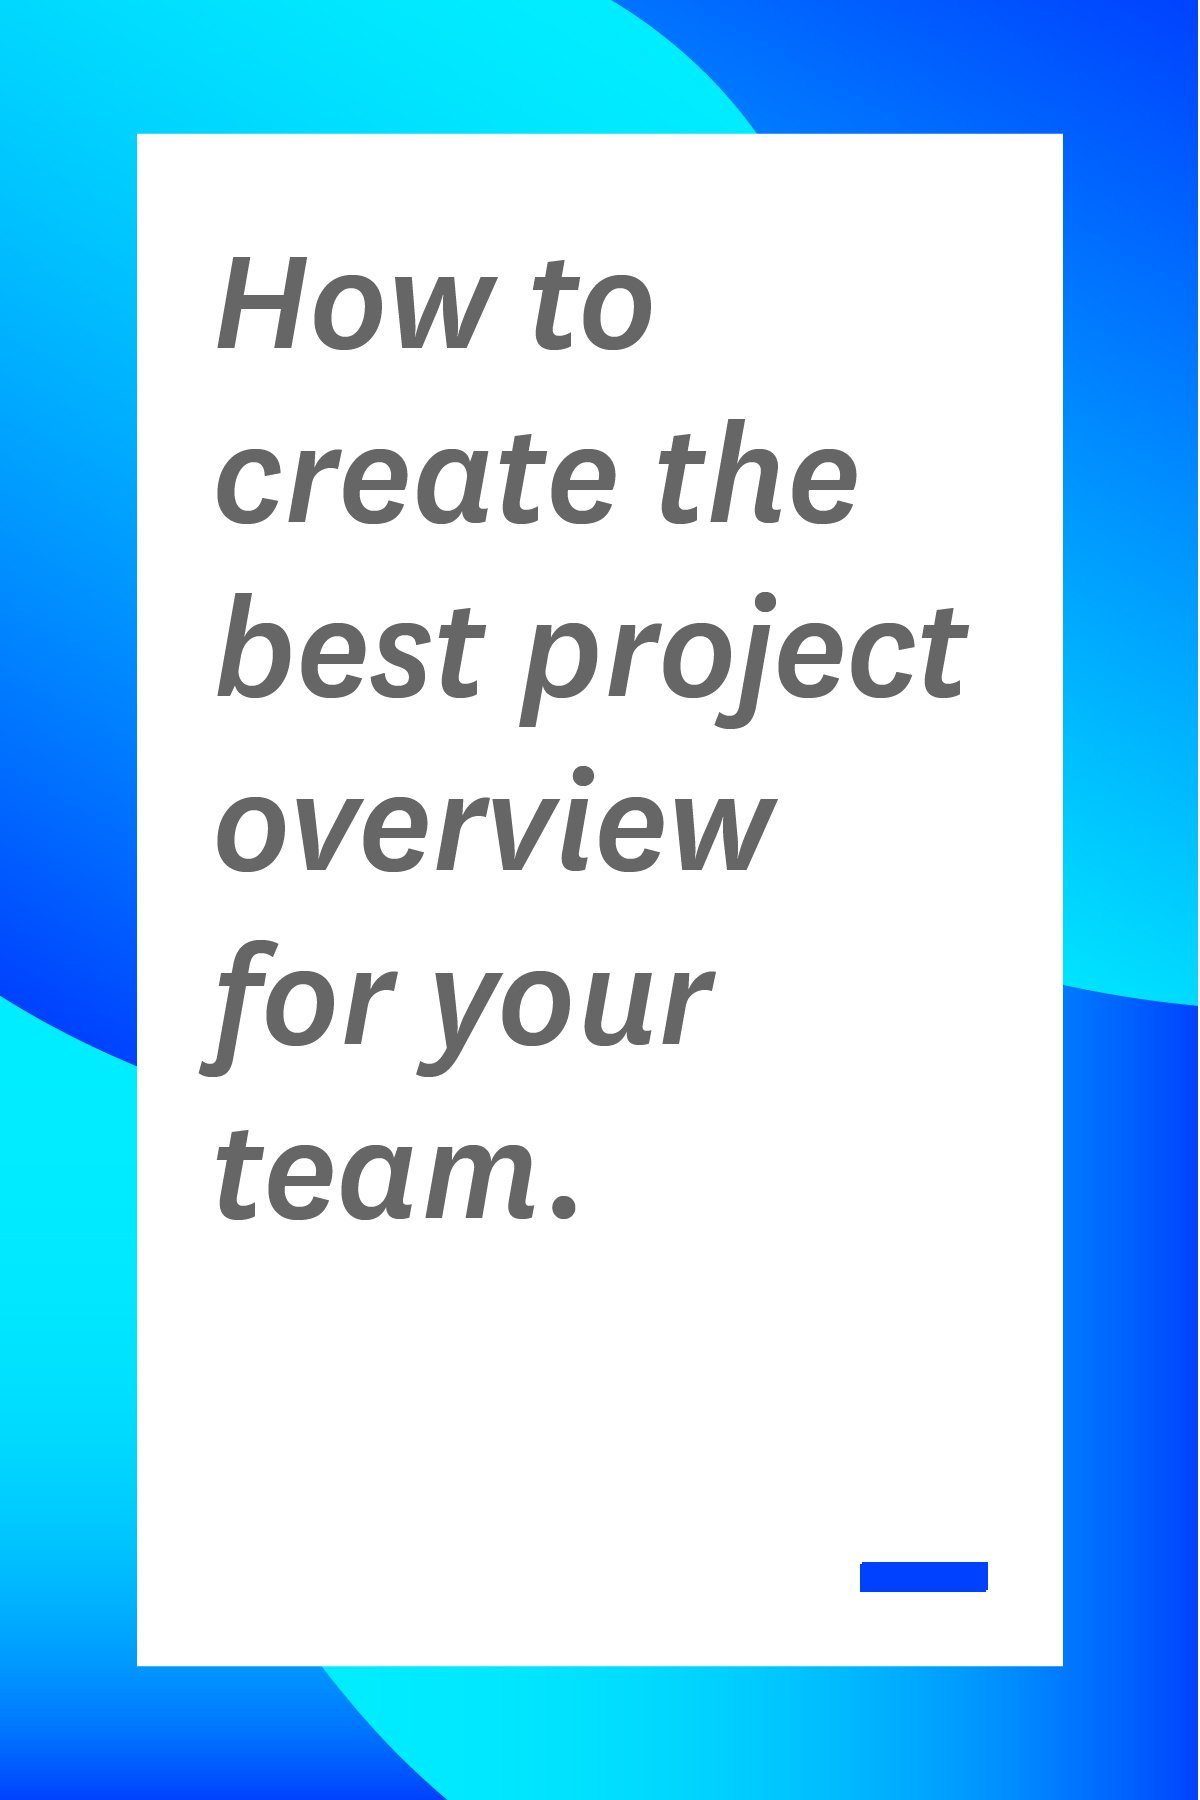 A project overview, sometimes referred to as a project summary, is a tool that allows you to plan out all the details of the project. Here's how to create a super effective project overview for your team.